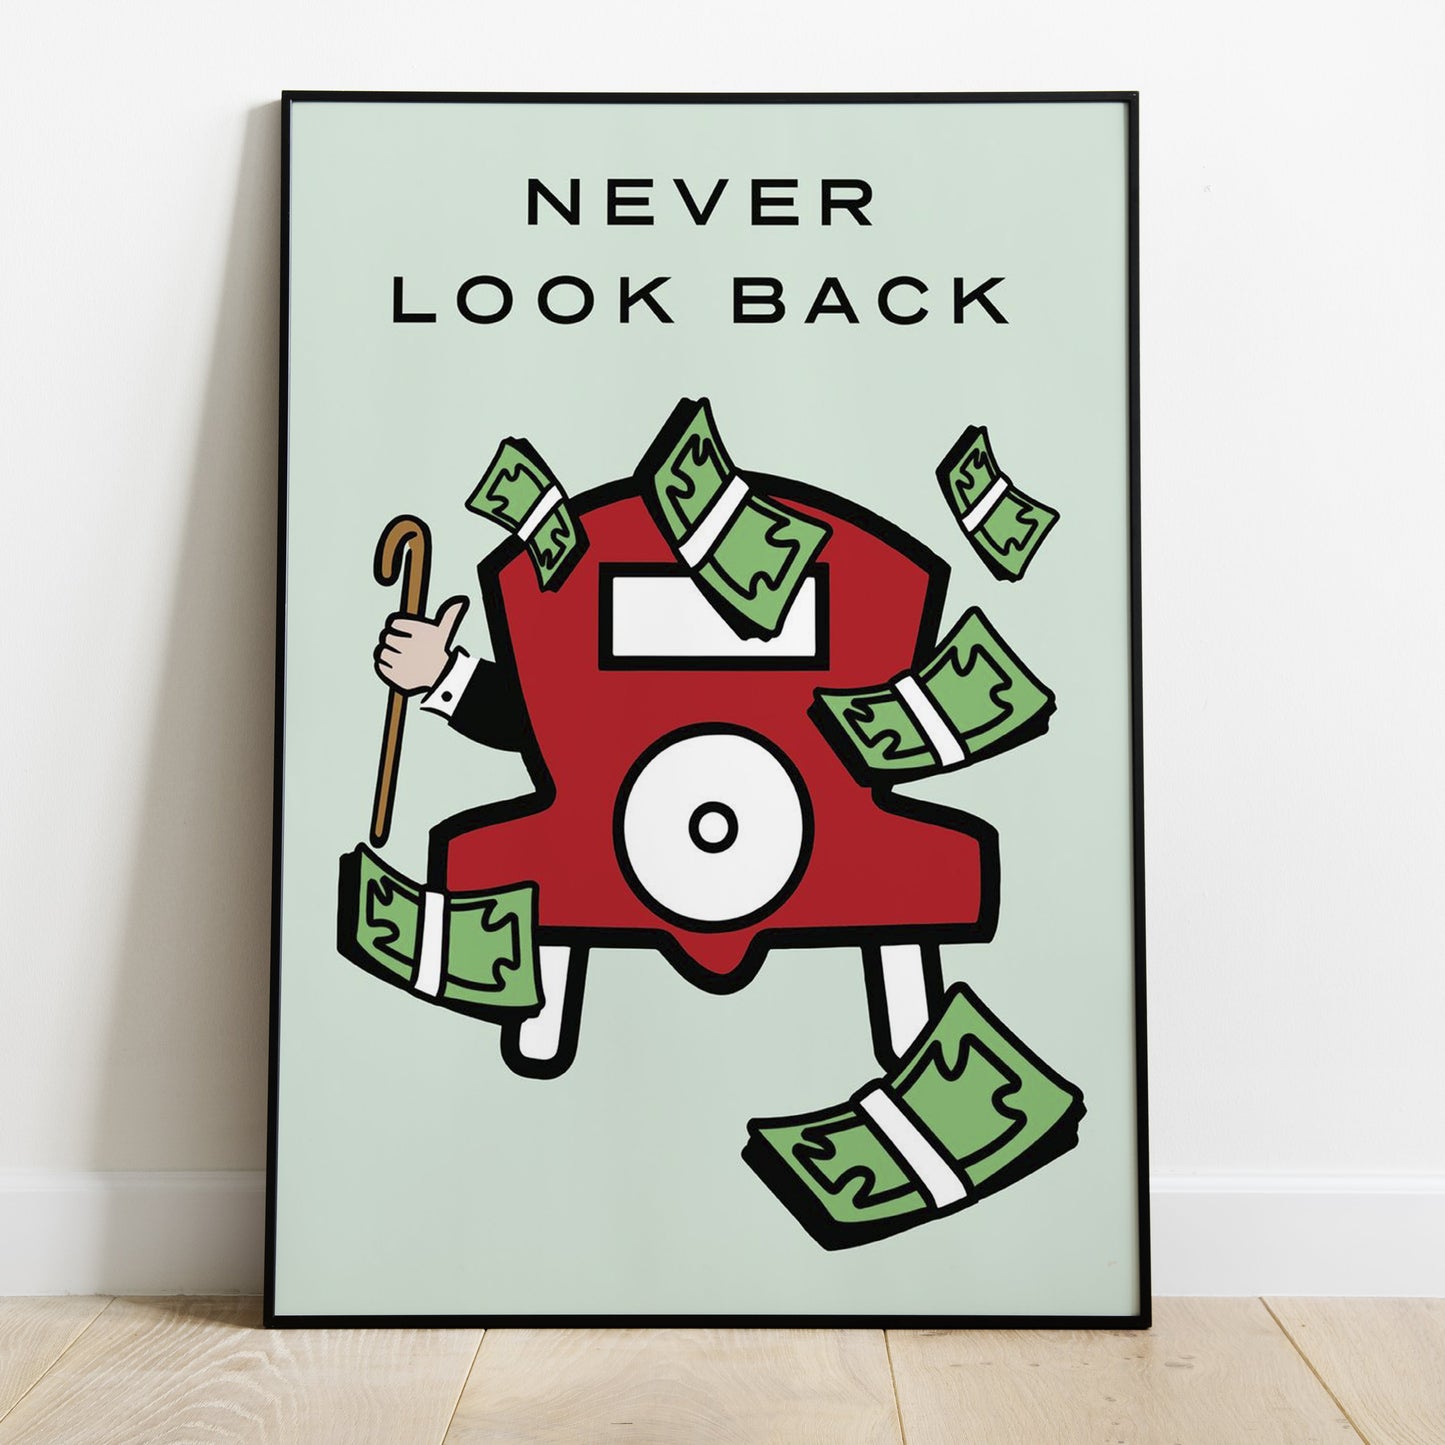 NEVER LOOK BACK Wall Art Poster for Home Office